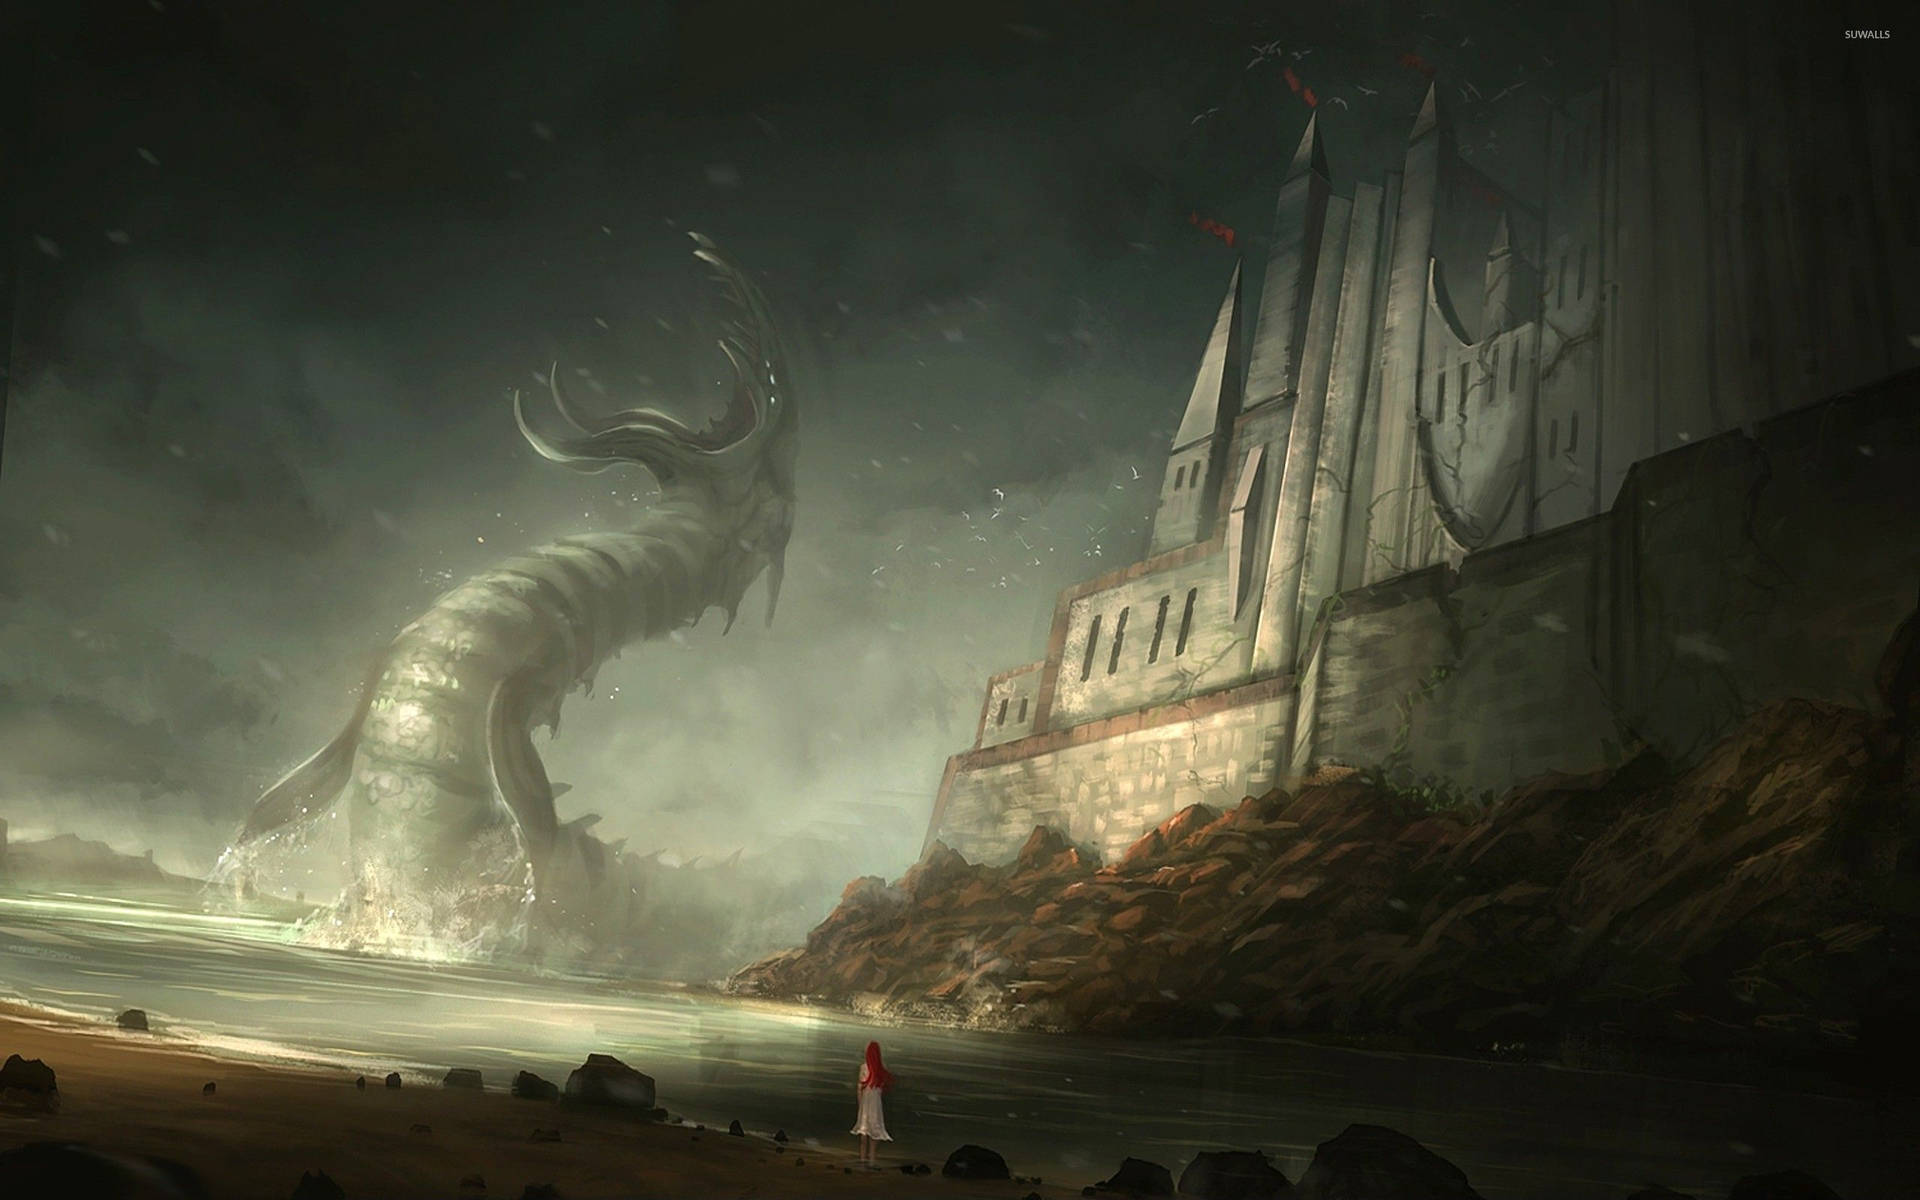 A young girl stands in awe of a beautiful beach castle, inspired by the mythical world of Cthulhu. Wallpaper